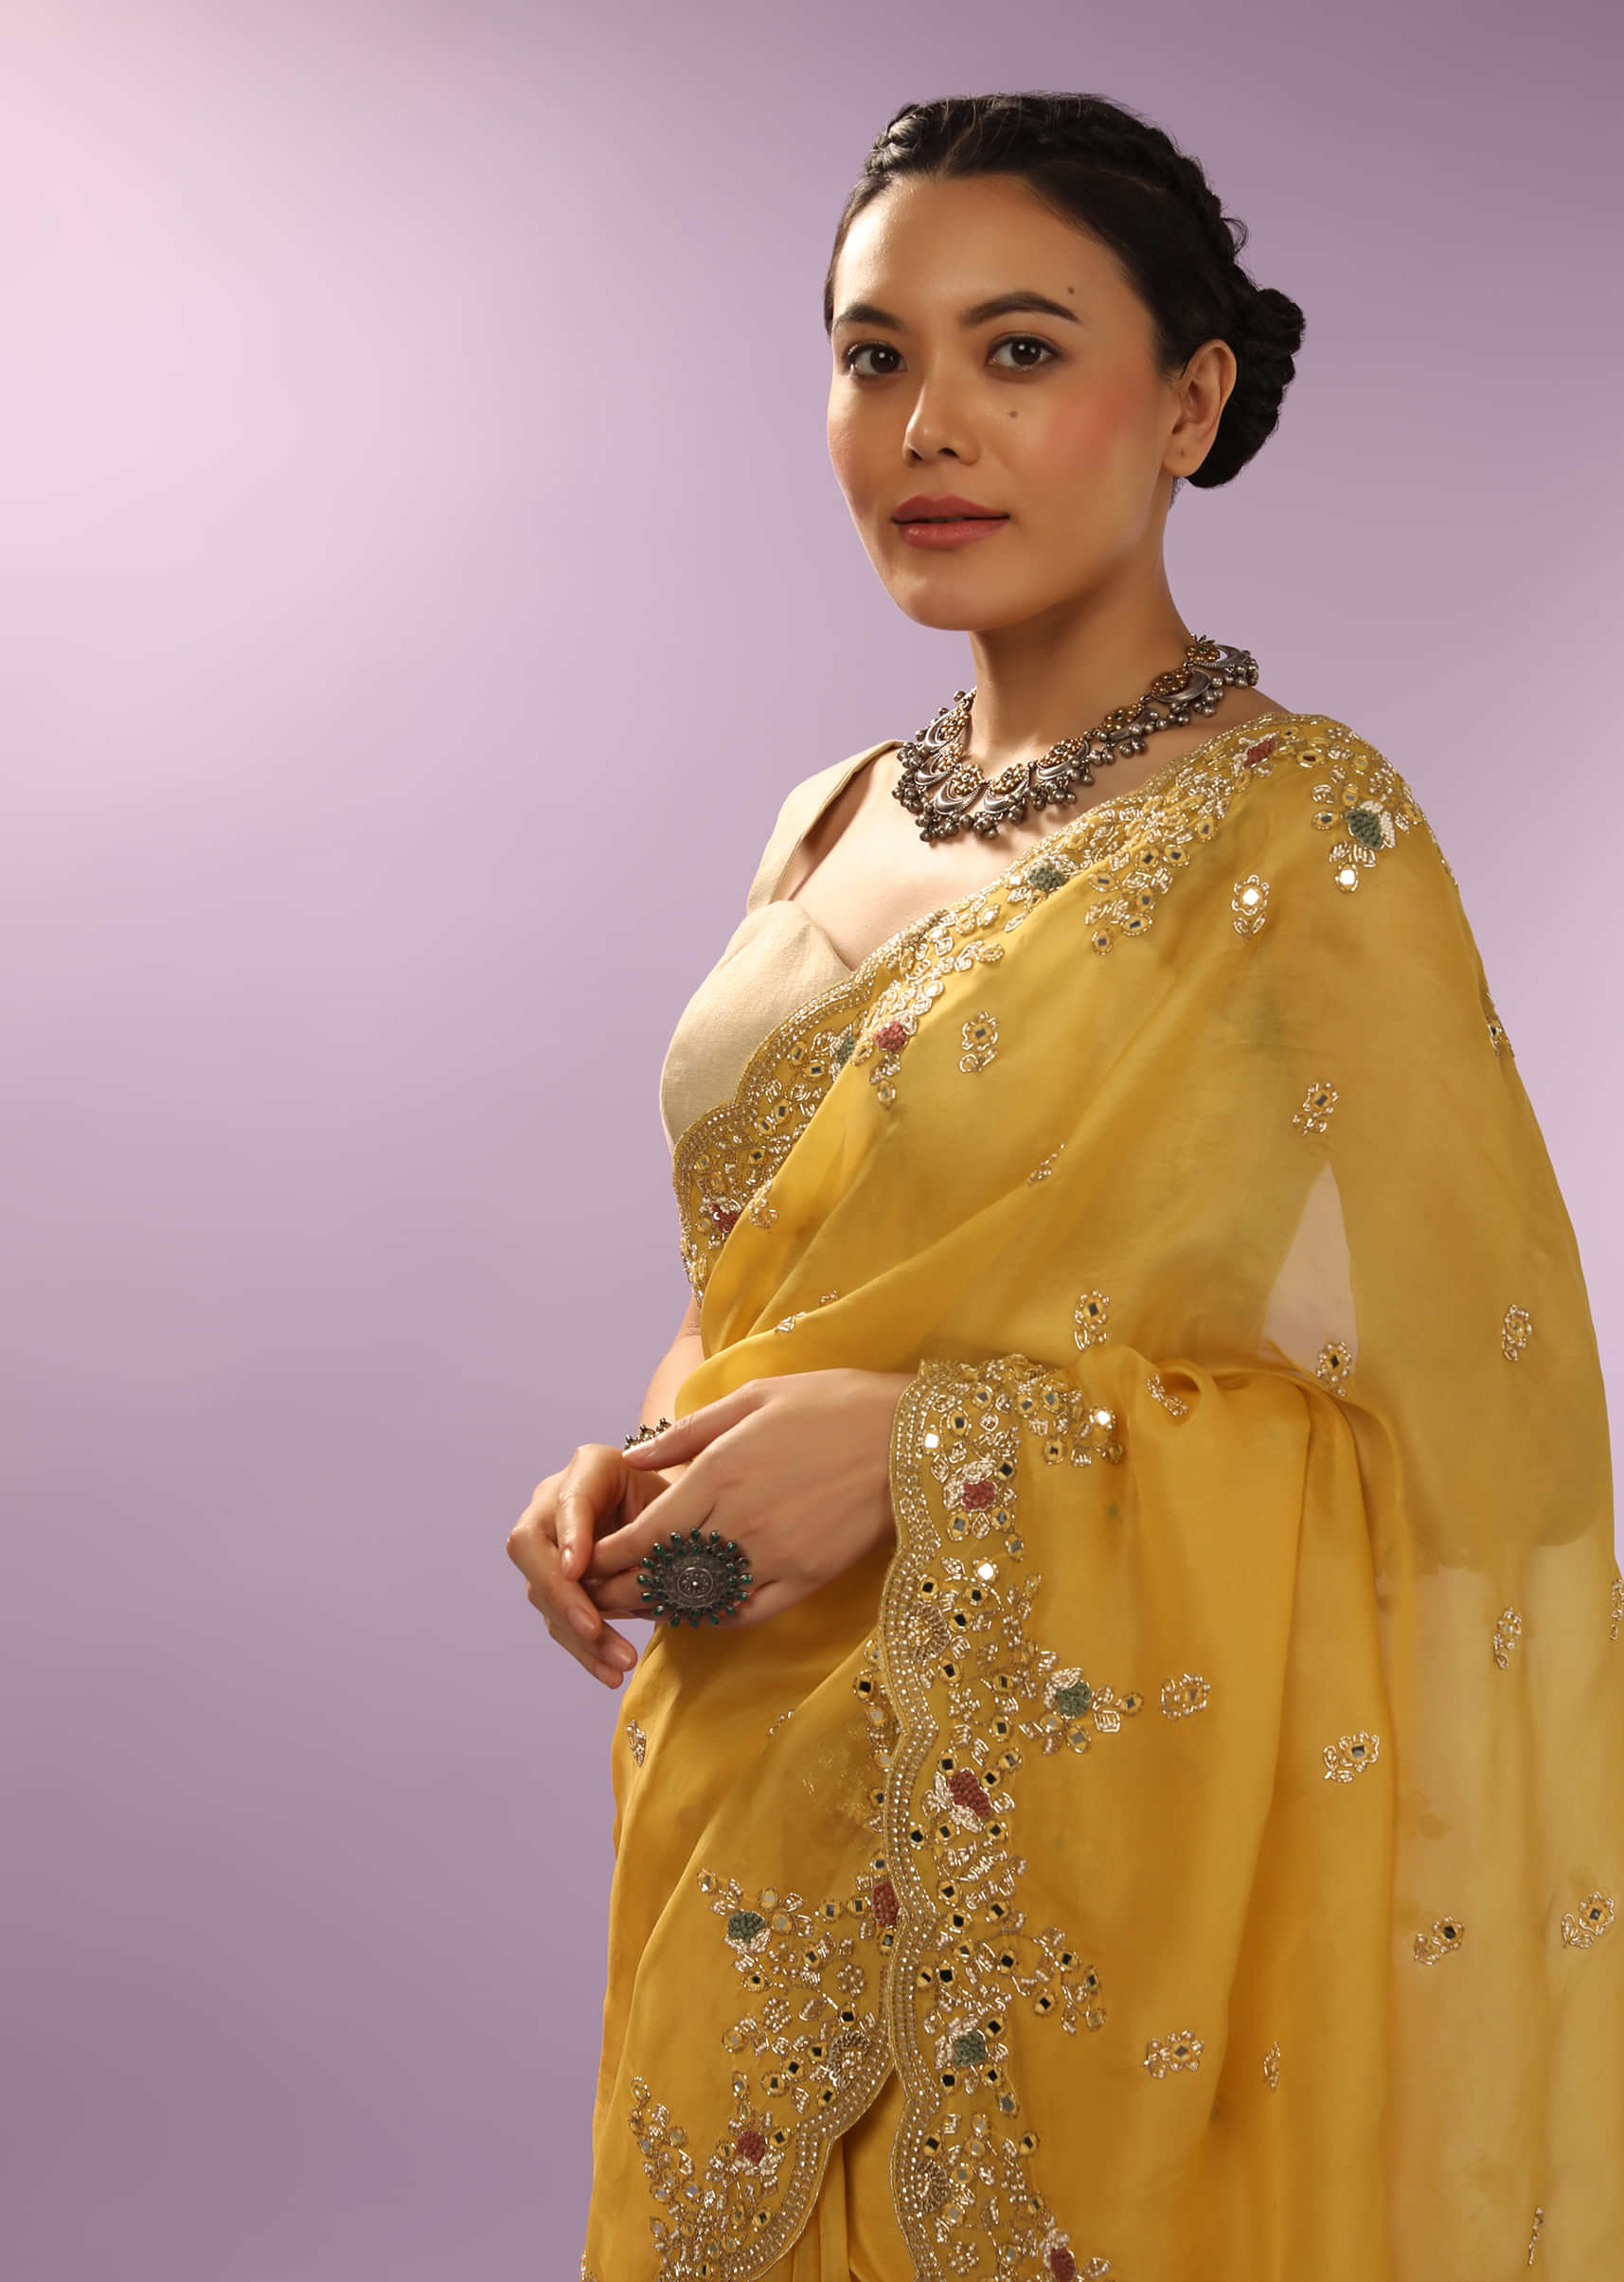 Canary Yellow Saree In Organza With Mirror And Cut Dana Embroidered Floral Motifs On The Border 